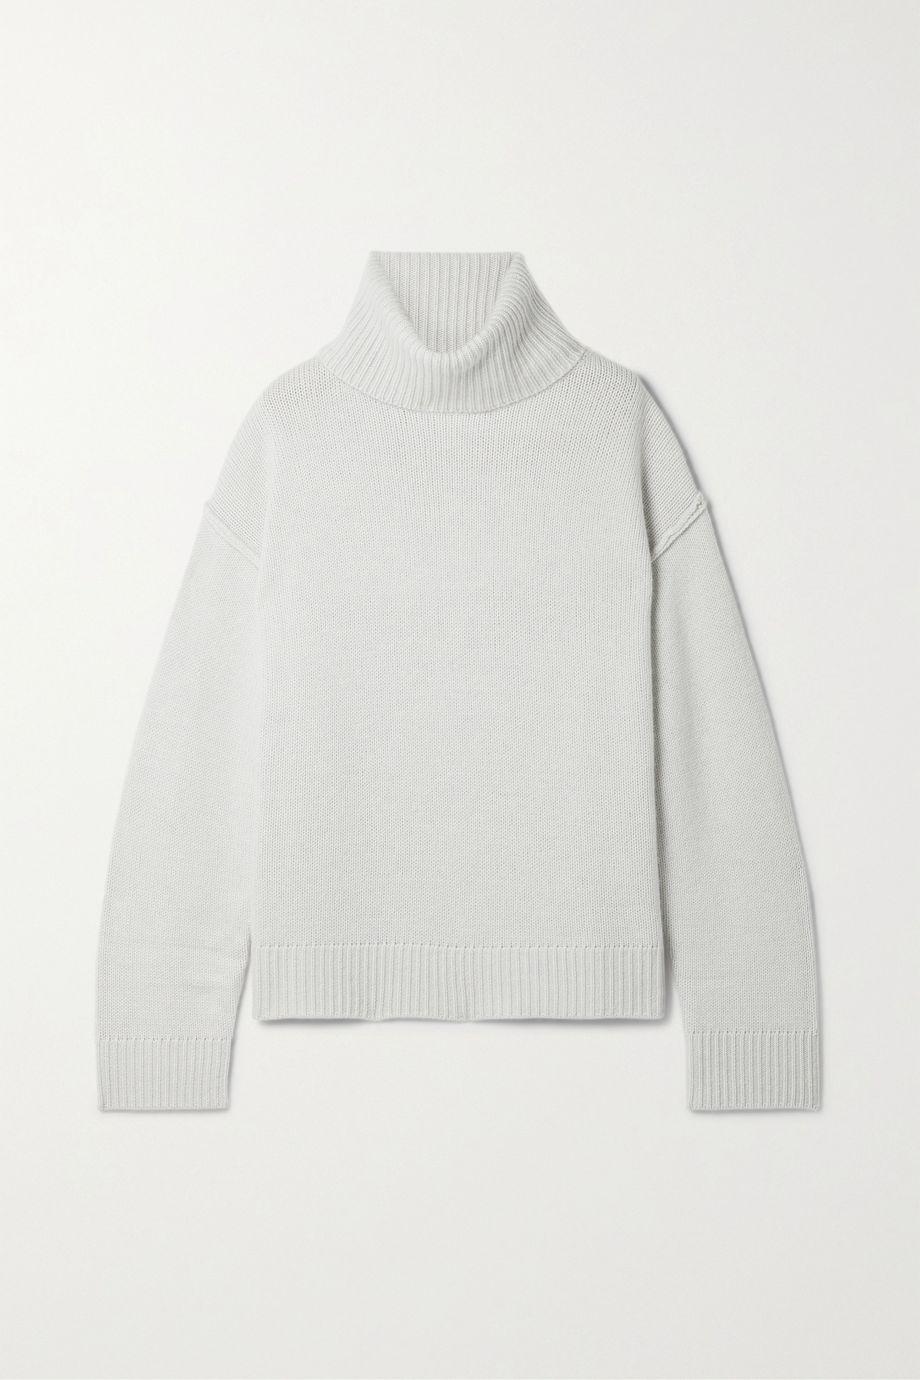 Wool and cashmere-blend turtleneck sweater by ALLUDE